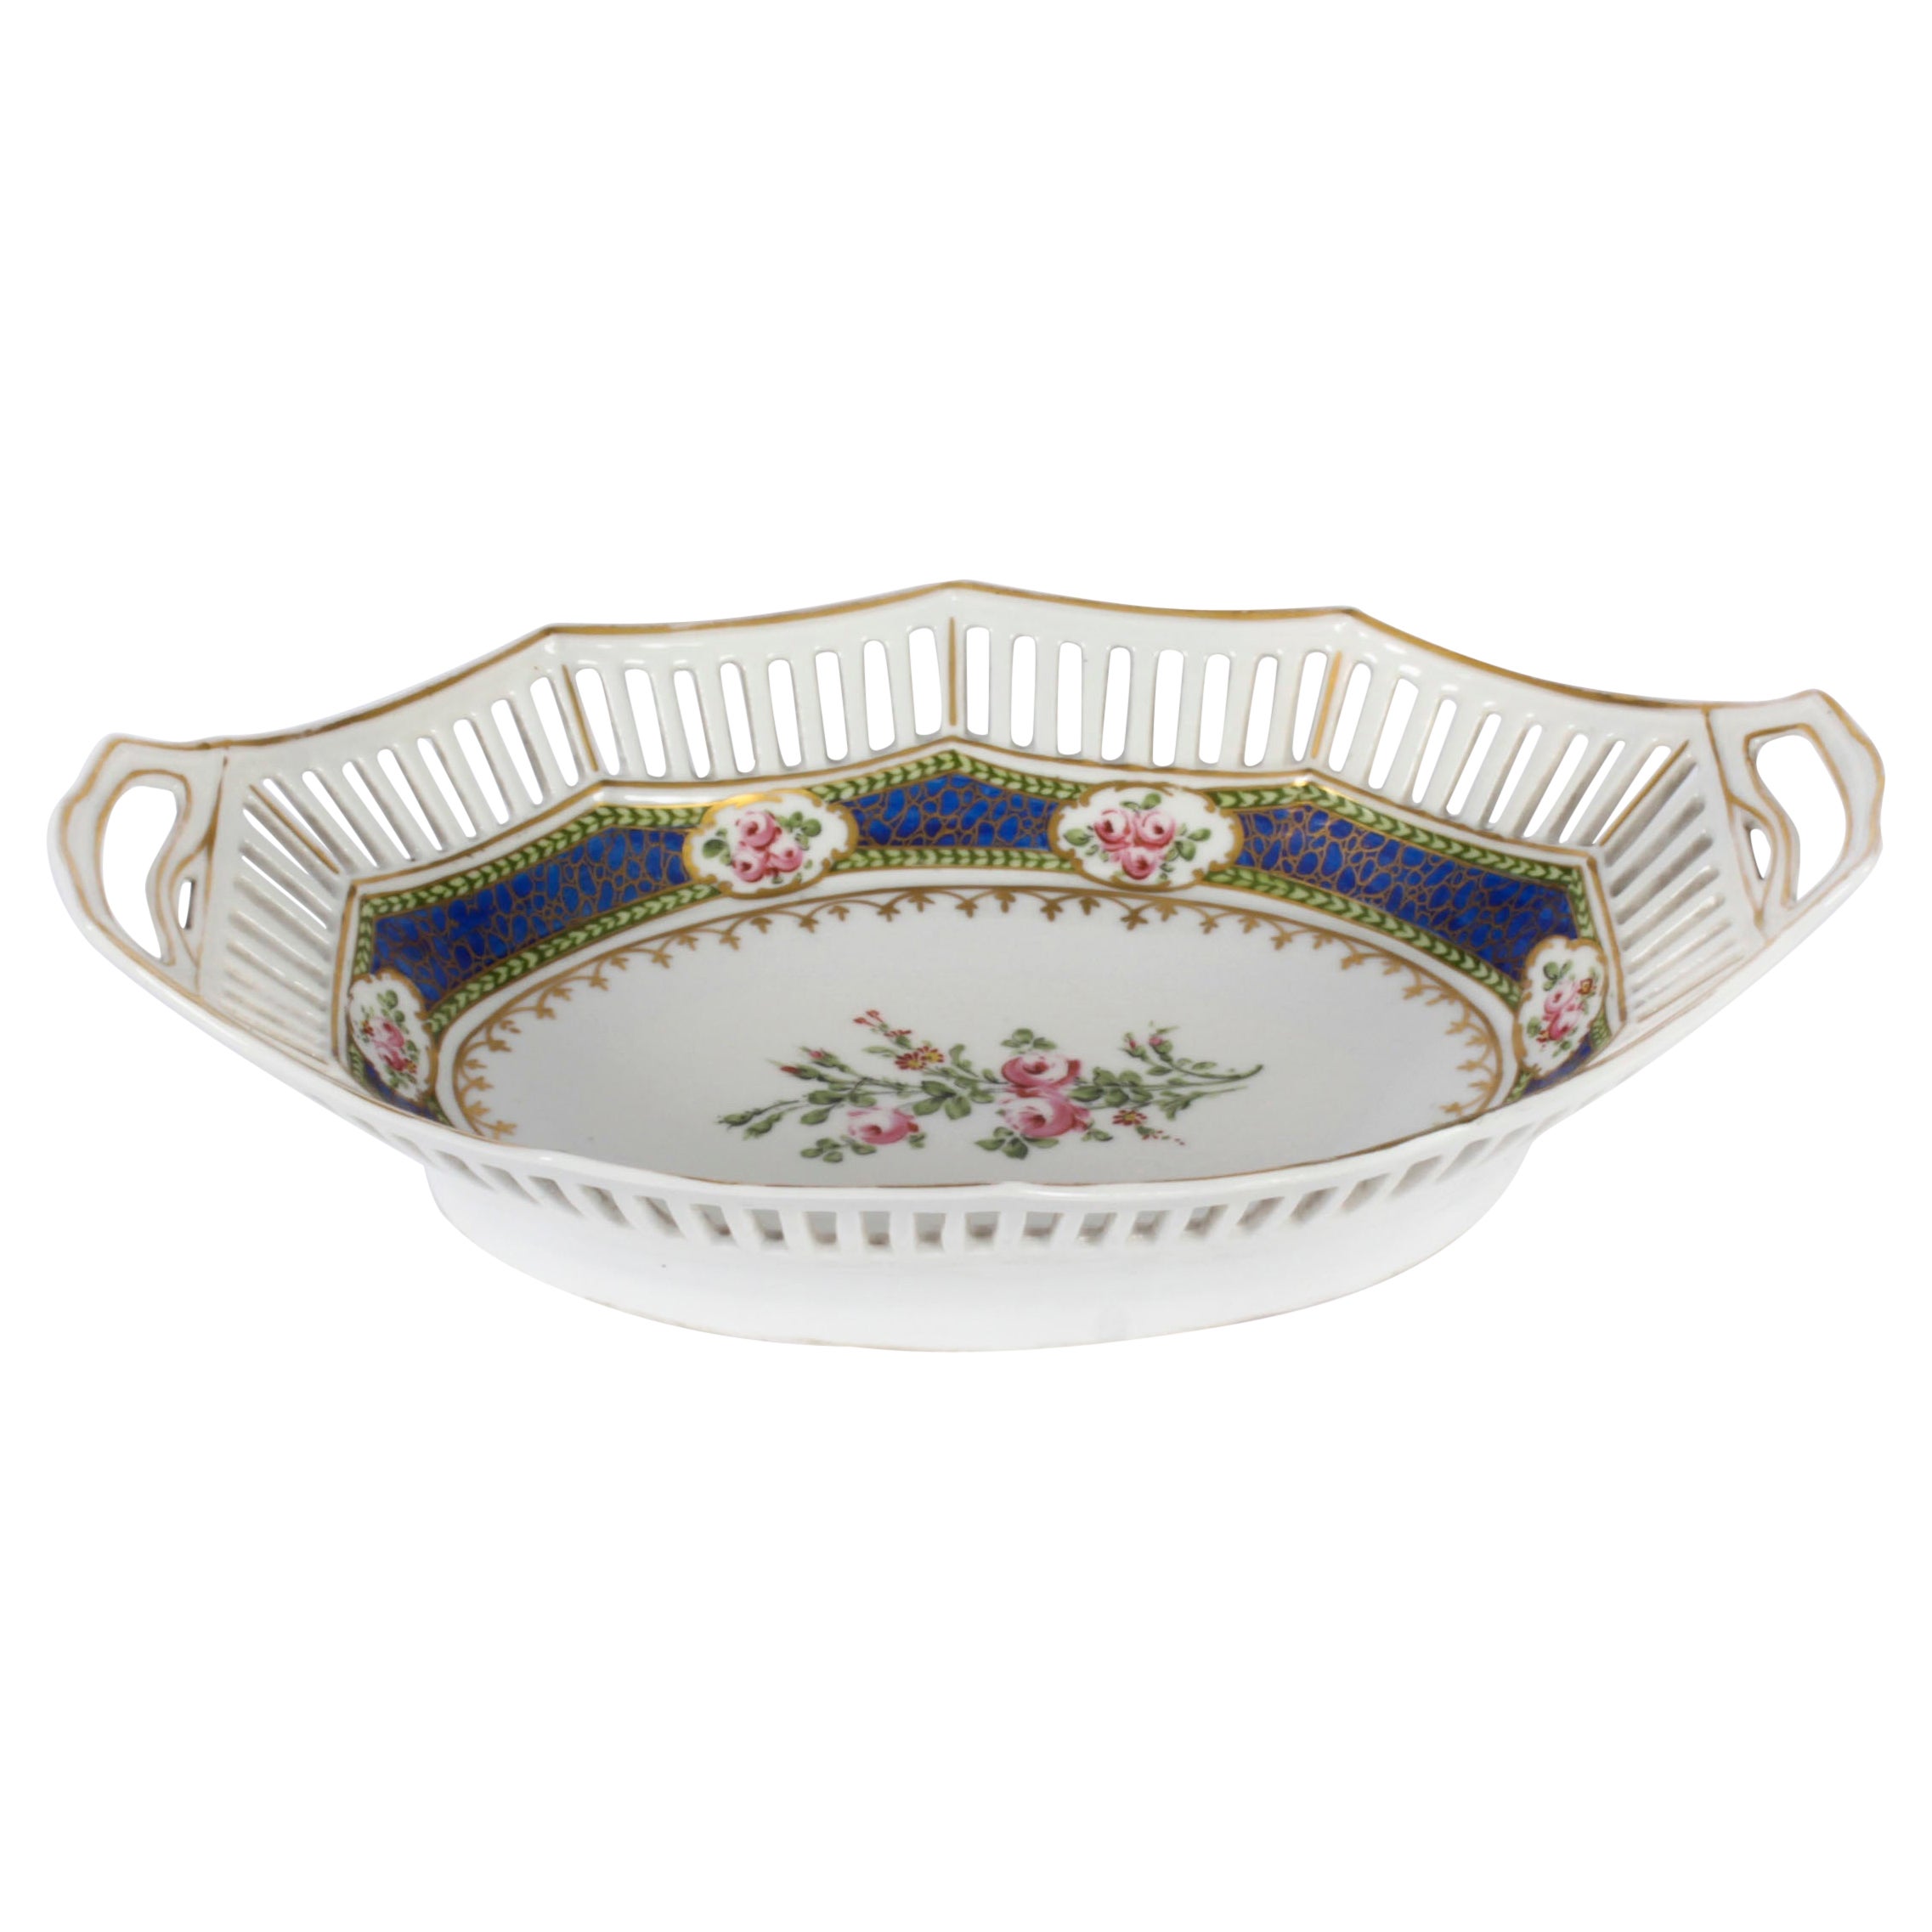 Antique French Sevres Oval Porcelain Dish Late 19th Century For Sale